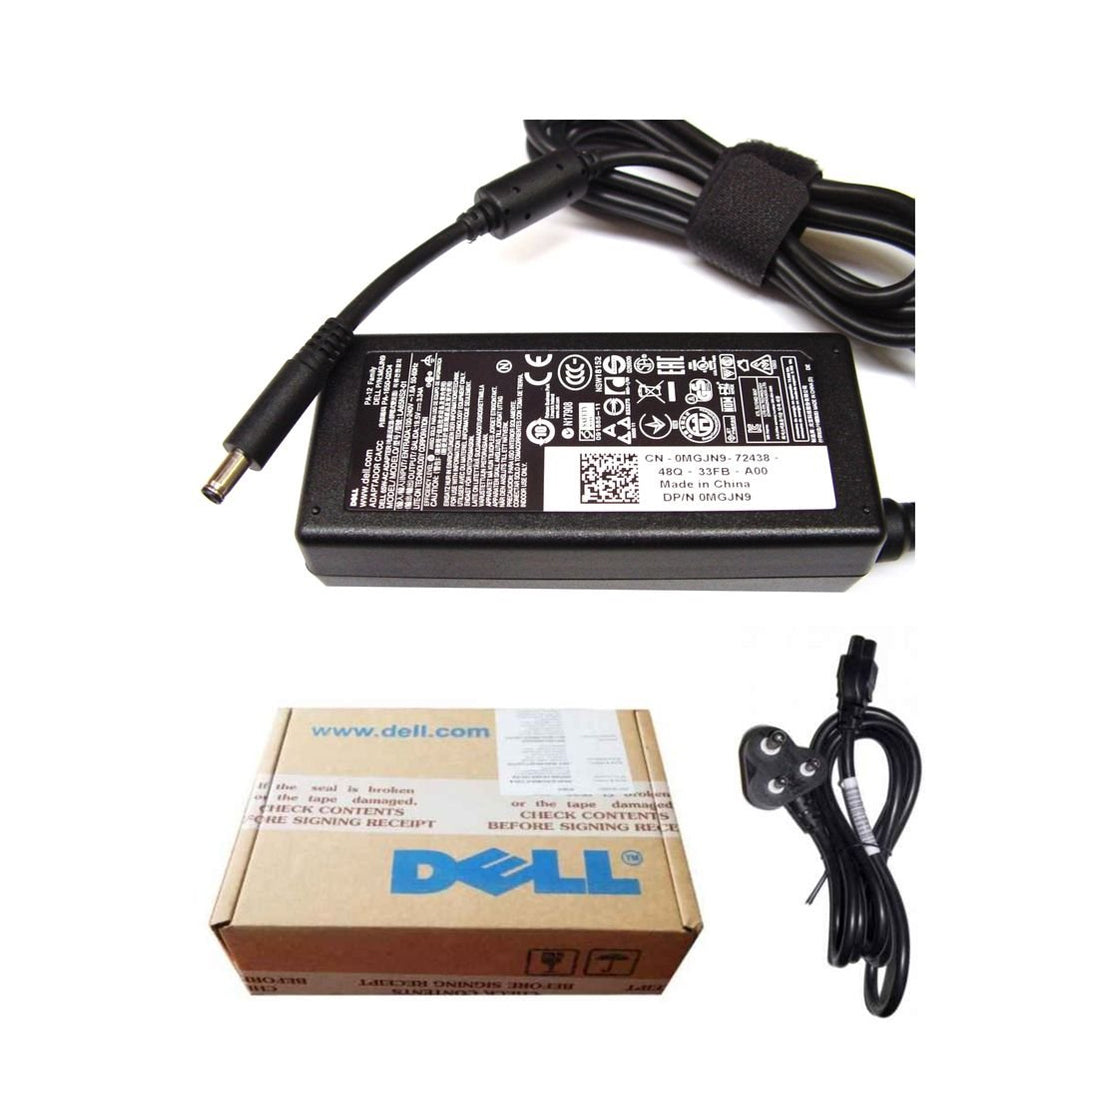 Dell Original 65W 19.5V 4.5mm Pin Laptop Charger Adapter for Vostro 5481 With Power Cord